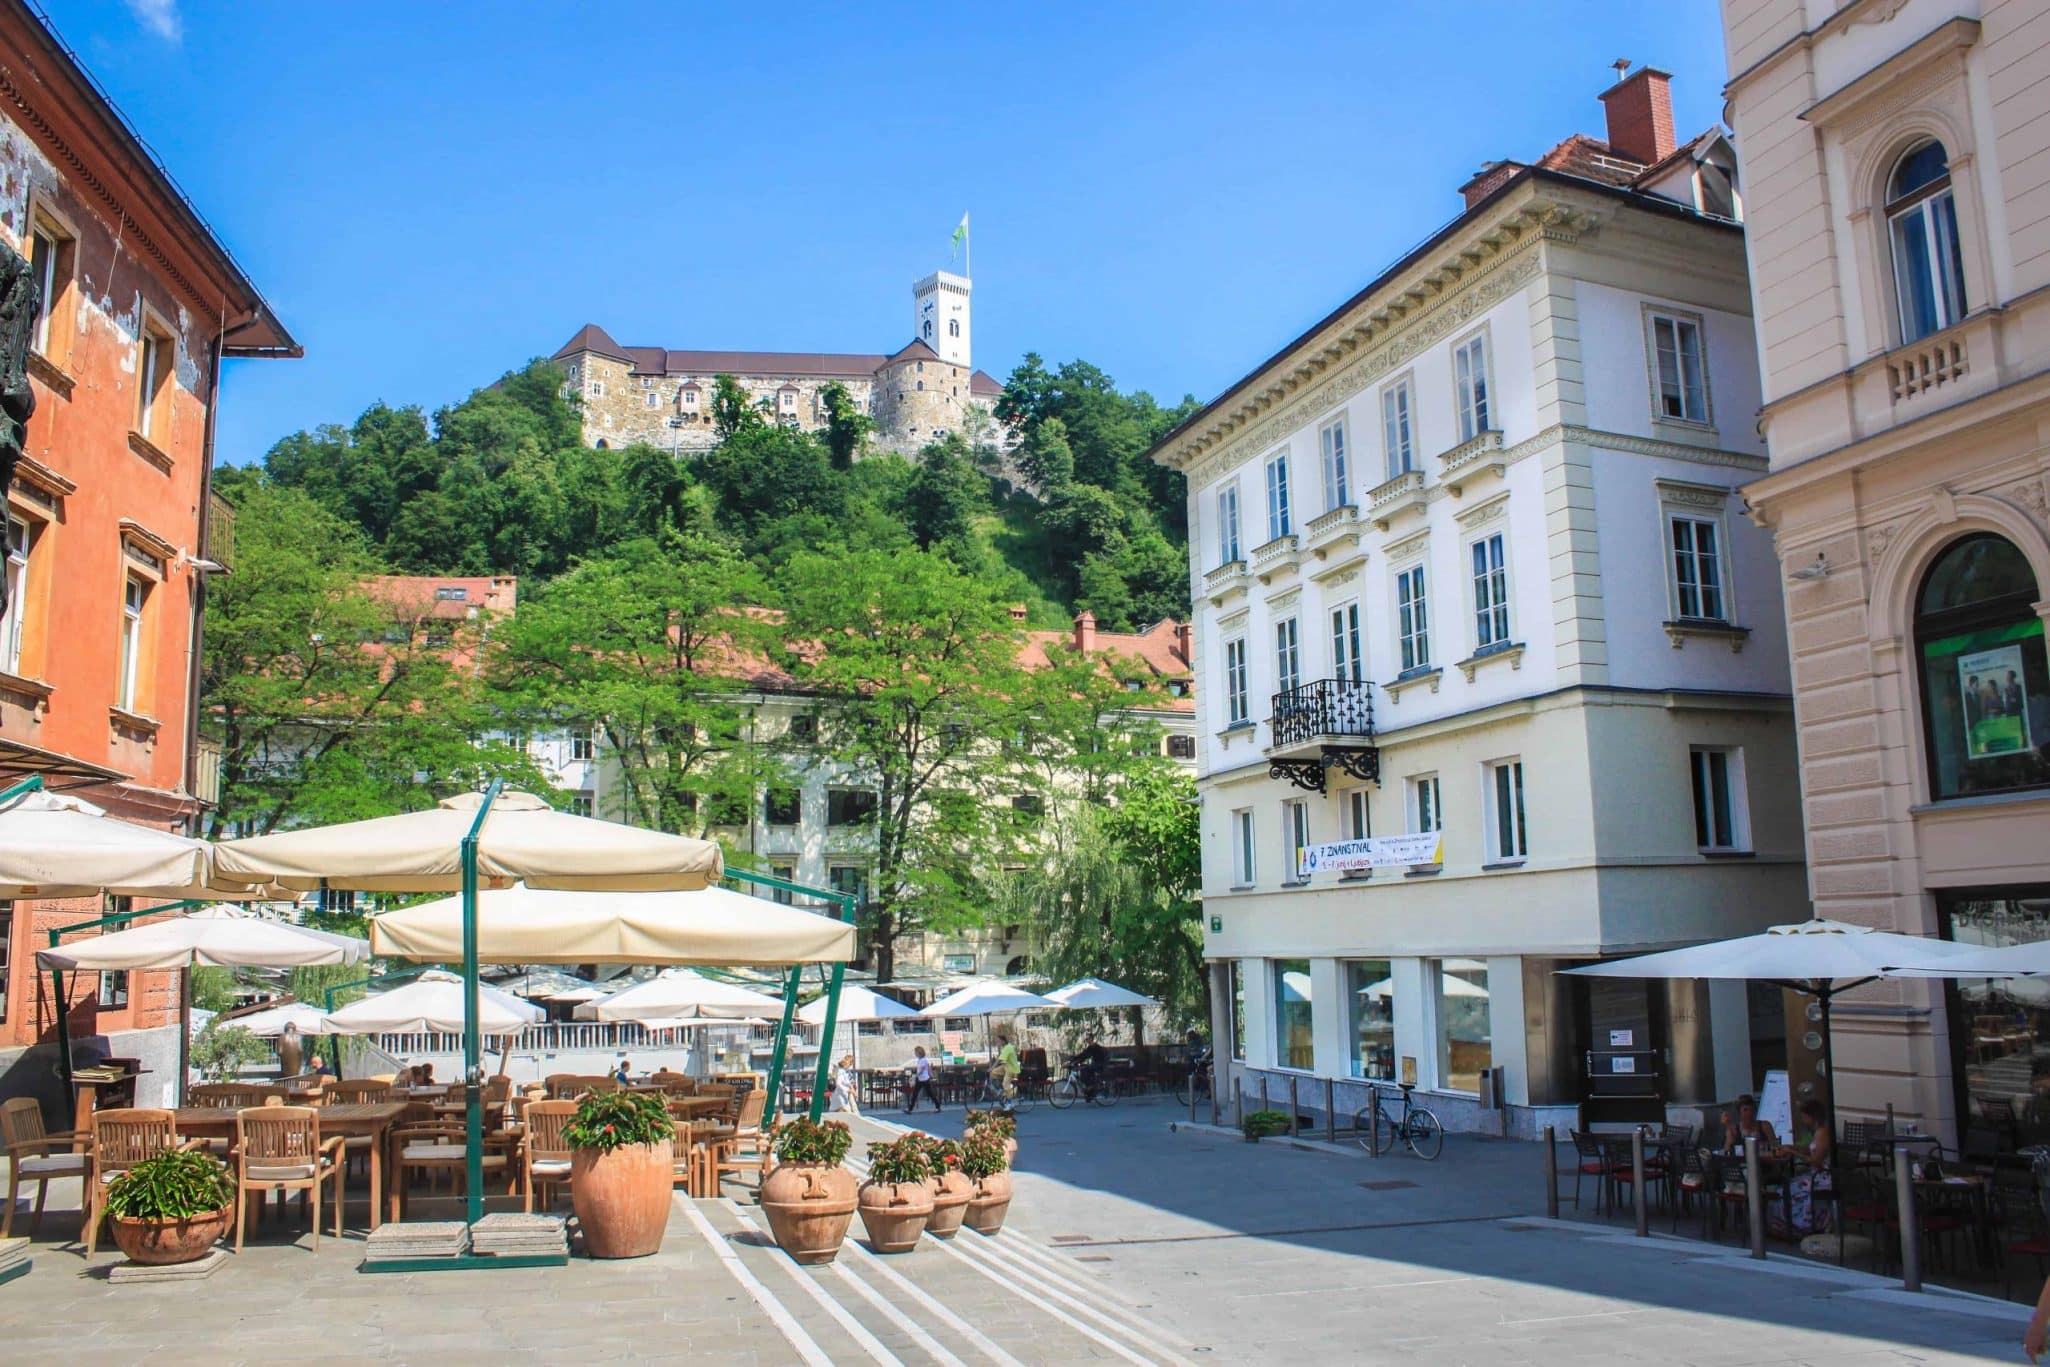 10 most beautiful cities in Slovenia that’ll take your breath away